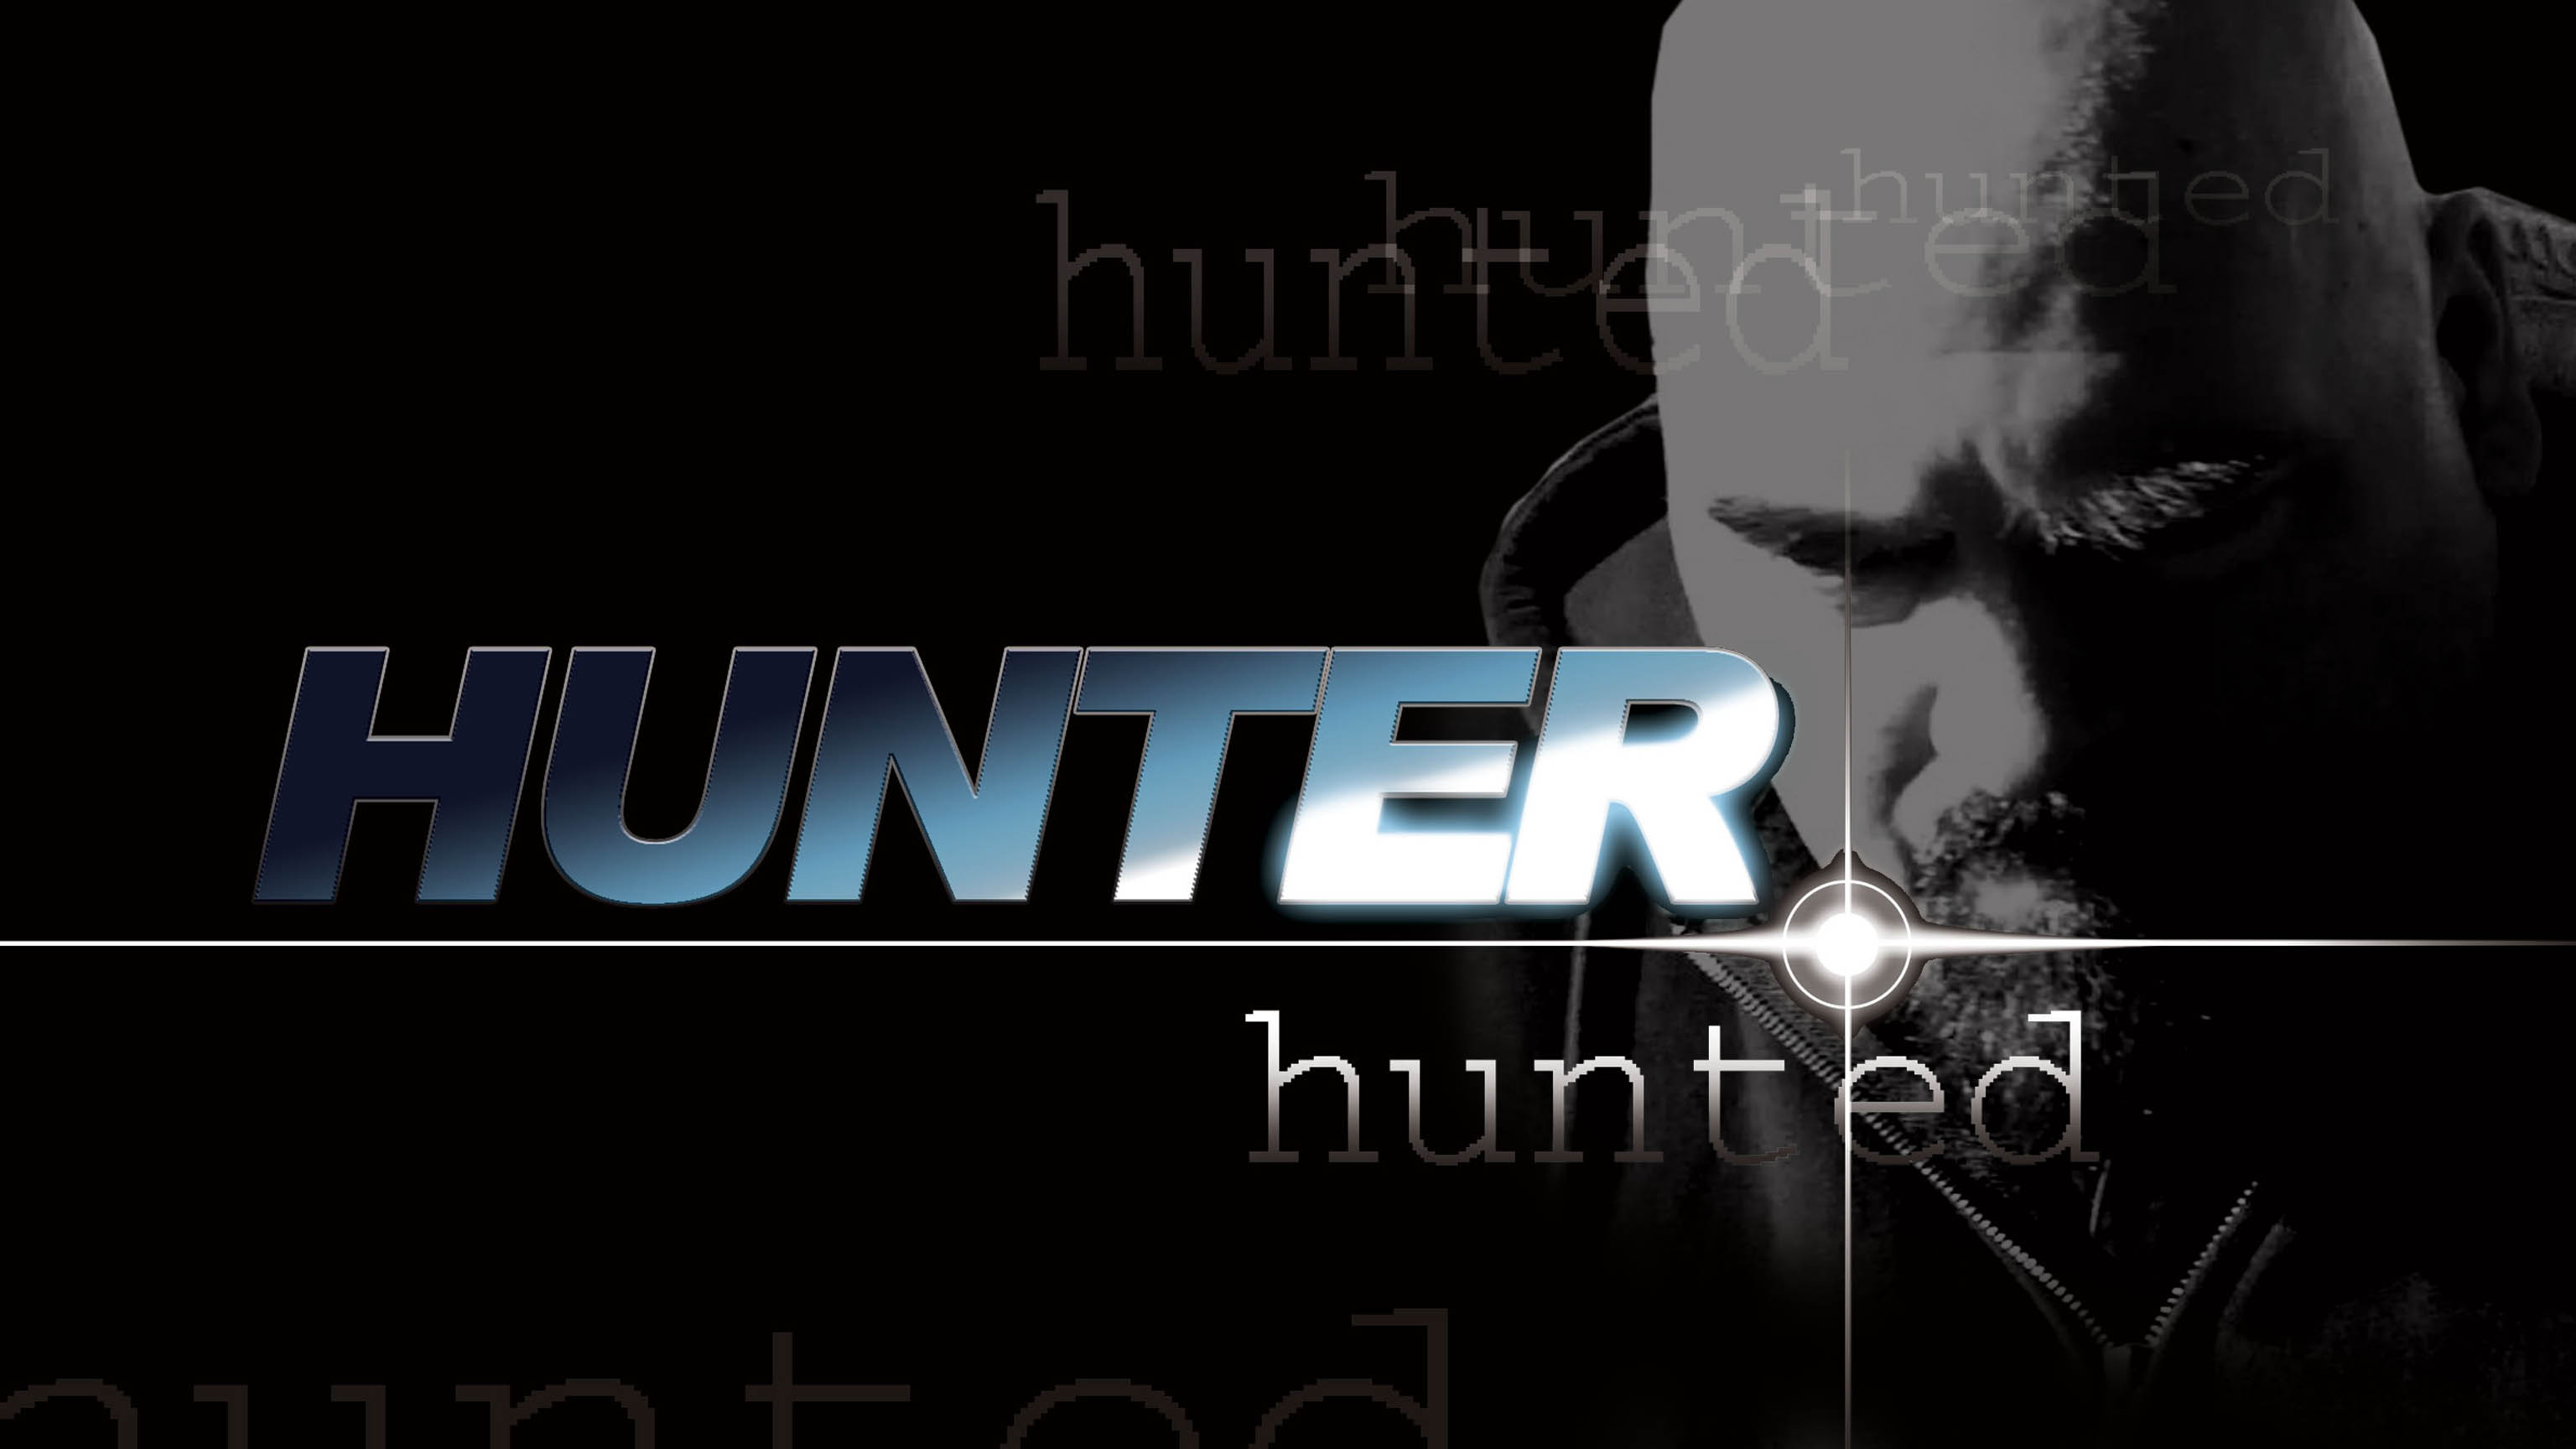 Hunter! Hunted! logo with Colt (Duane Johnson) featured.